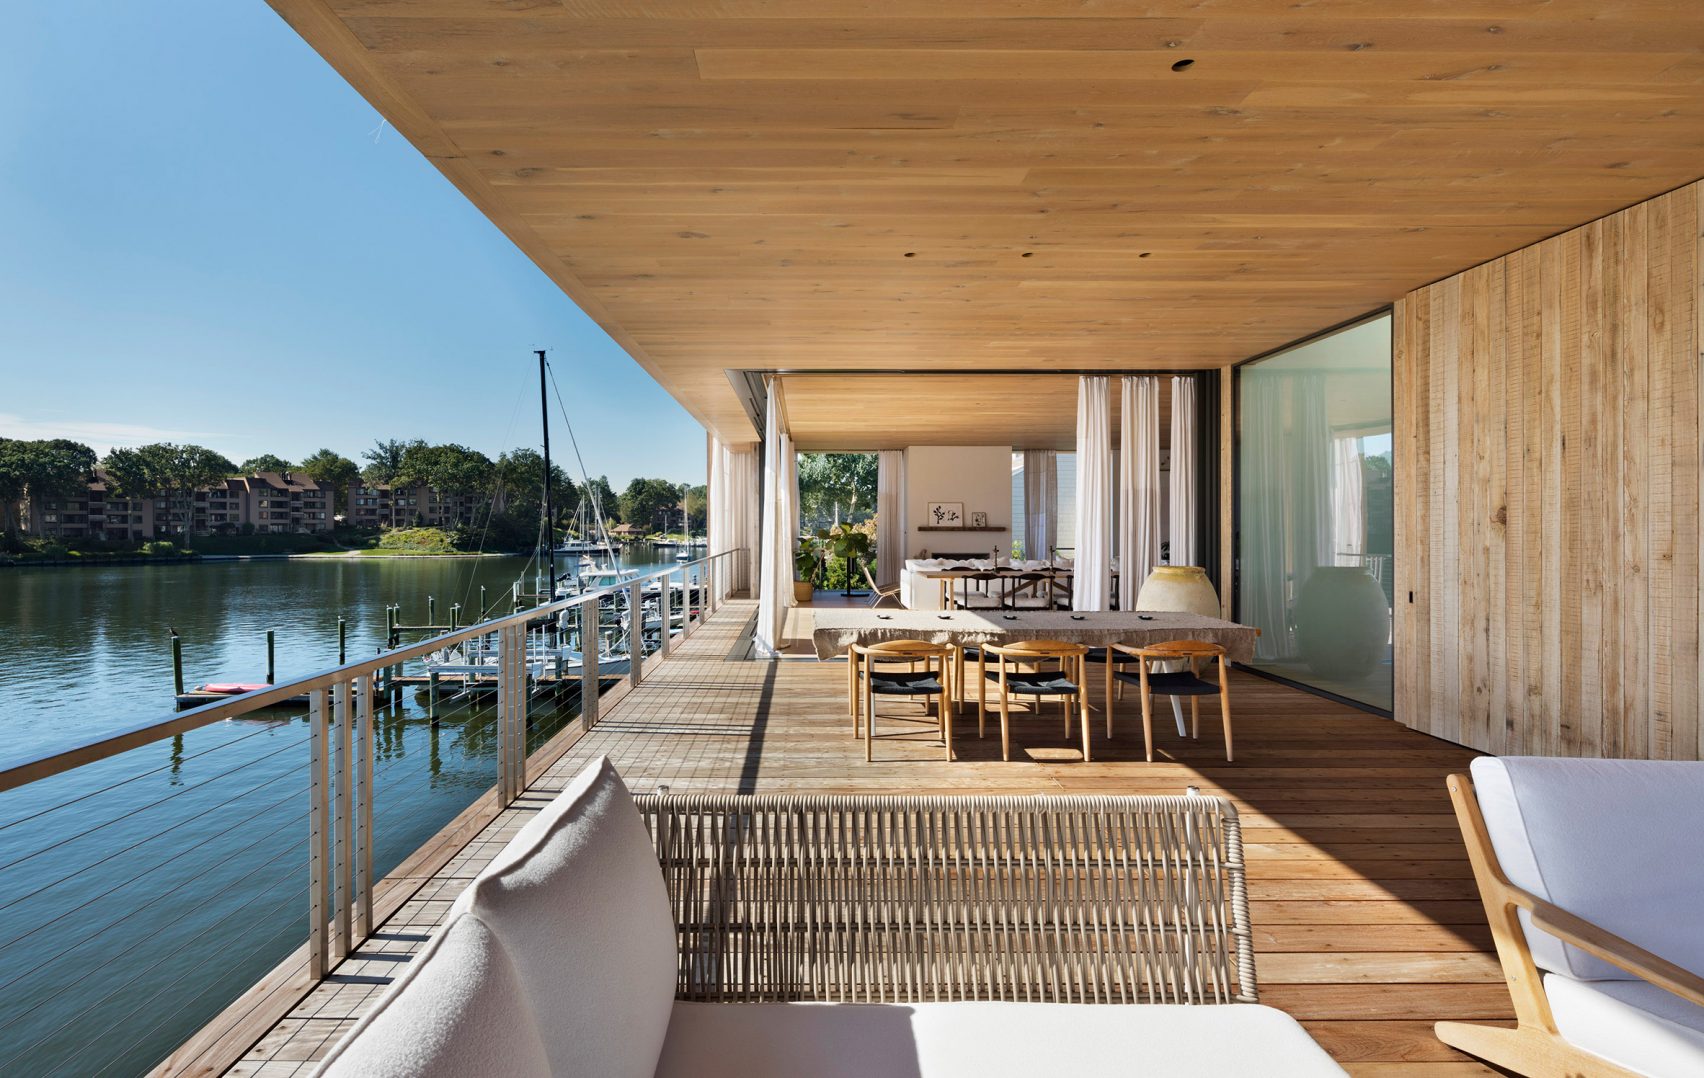 Bates Masi, wooden home, sailing family, Annapolis, waterfront, New York, Chesapeake Bay, Acton Cove, Maryland, capital city, Us Naval Academy, dock, boat, residence, boating, sliding glass door, curtain, indoor, outdoor, privacy, weather, living room, cantilevered decks, balcony, Acton Cove, modern, nautical aesthetic, white walls, cabinet, furniture, kitchen, couch, six PP503 chair, Hans J Wegner, swimming pool, dock, pool, bedroom, en-suite bathroom, Acton House, garage, studio, garden, Virginia-based Gregg Bleam